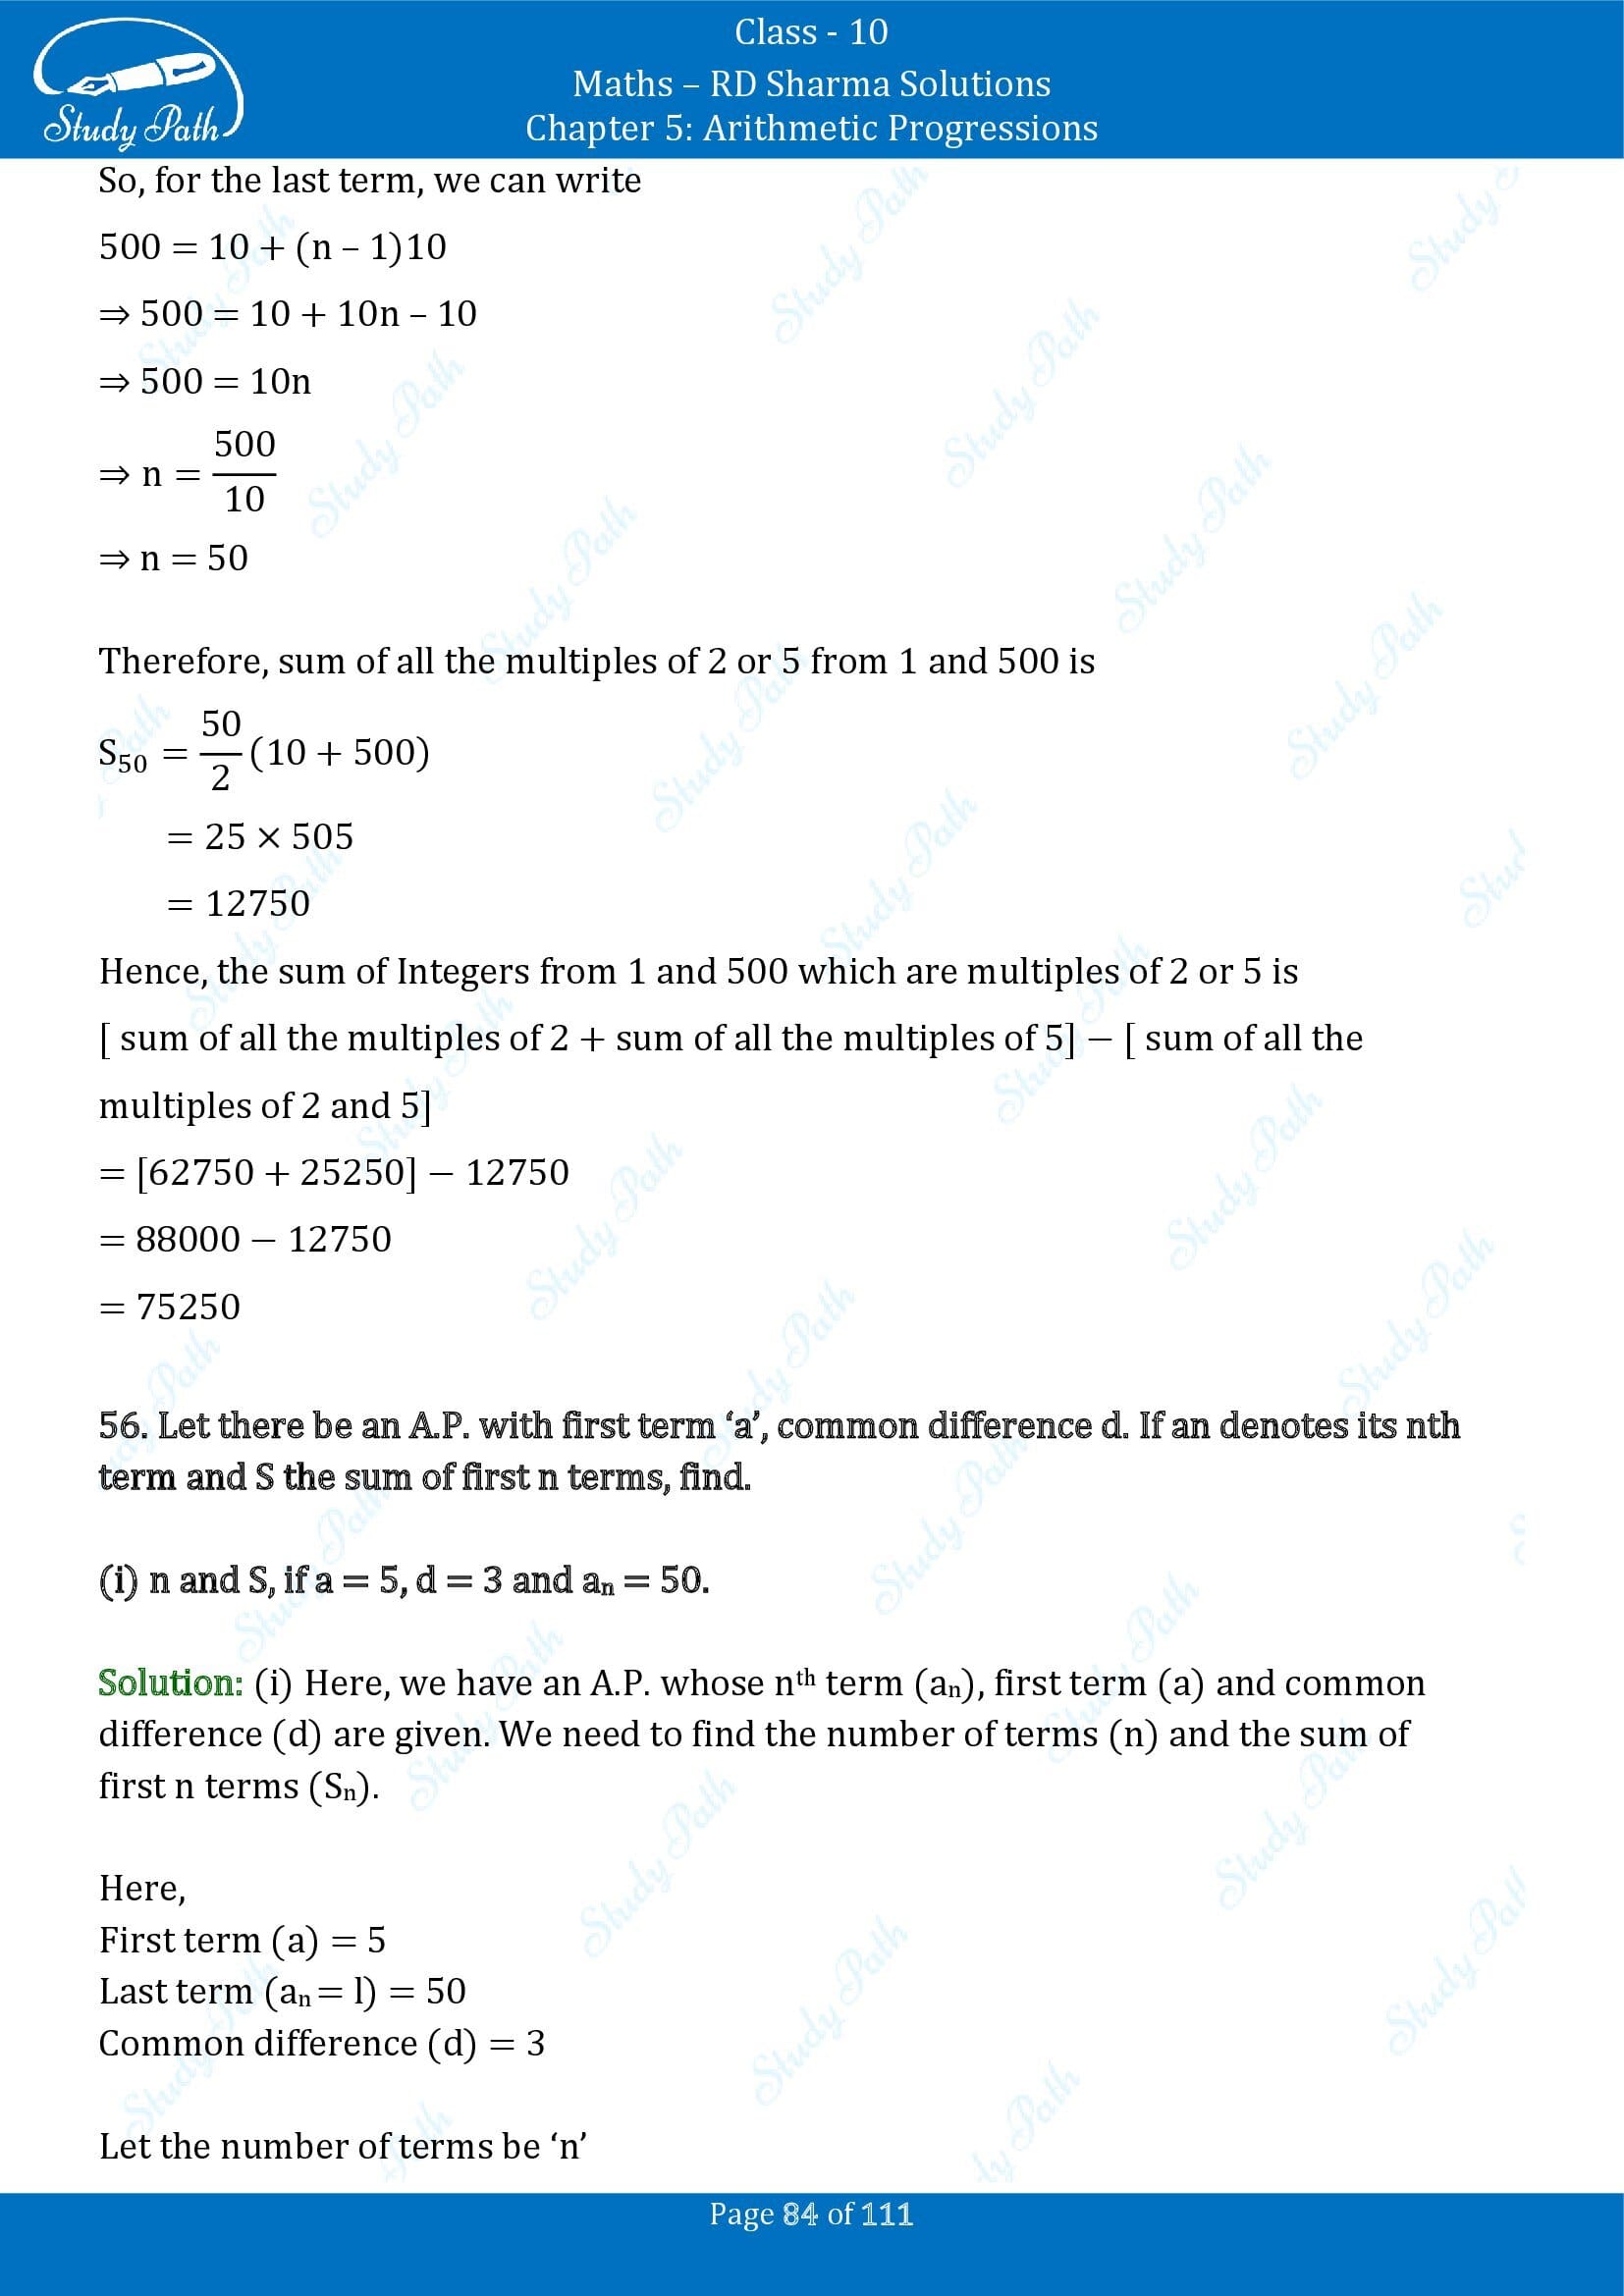 RD Sharma Solutions Class 10 Chapter 5 Arithmetic Progressions Exercise 5.6 00084